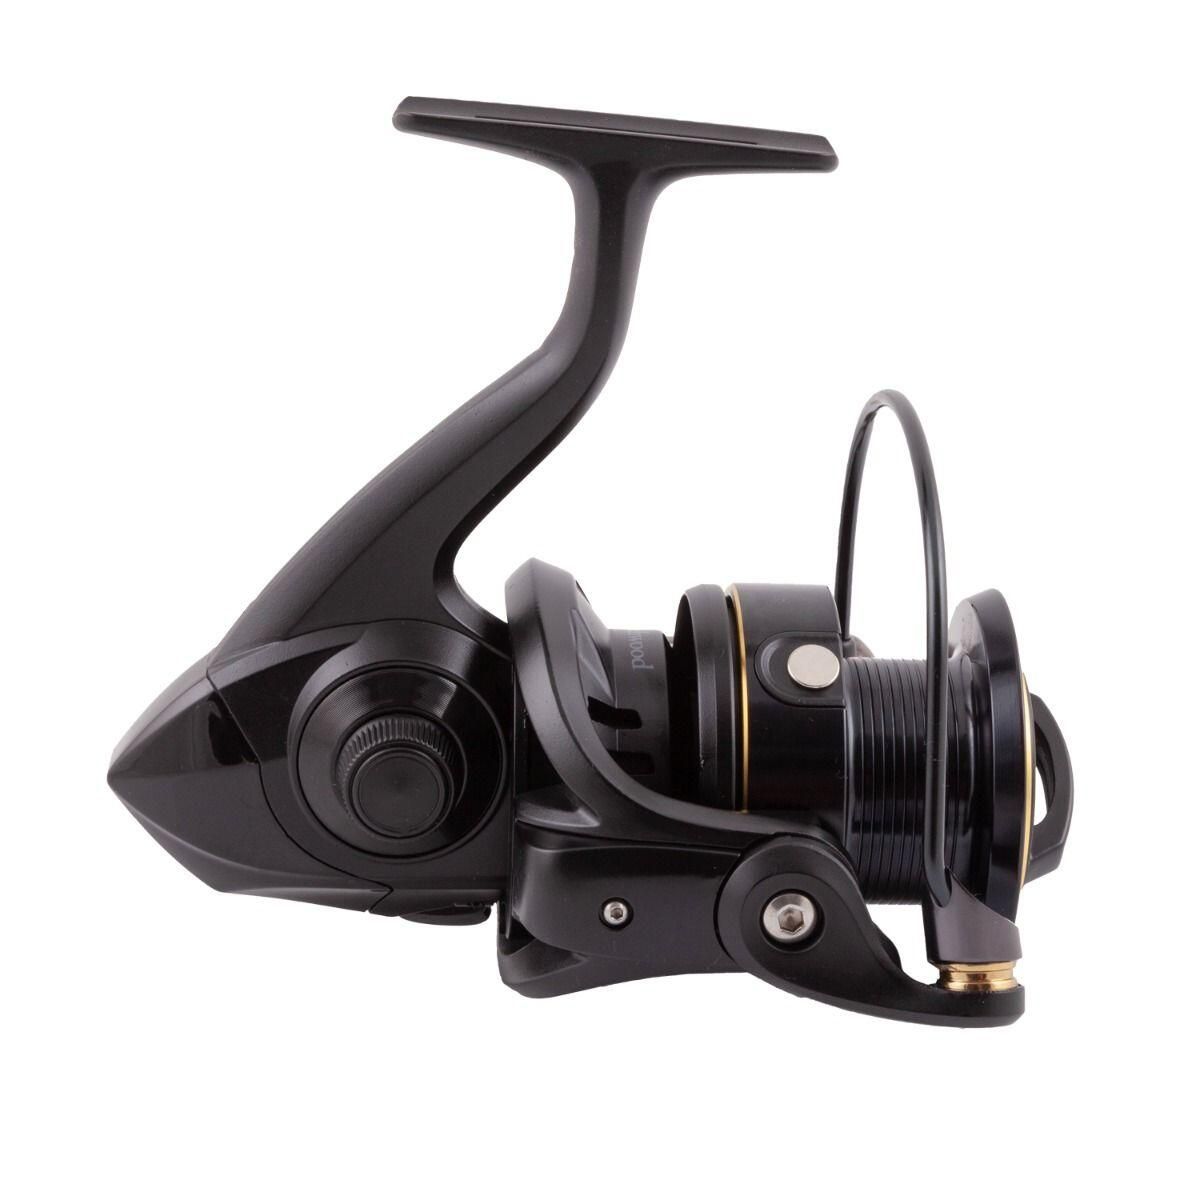 Wychwood Carp - Looking for a big pit reel but don't want to re-mortgage?  The Wychwood Riot 75S offers exceptional value for money, comes with a  spare shallow spool, and you can